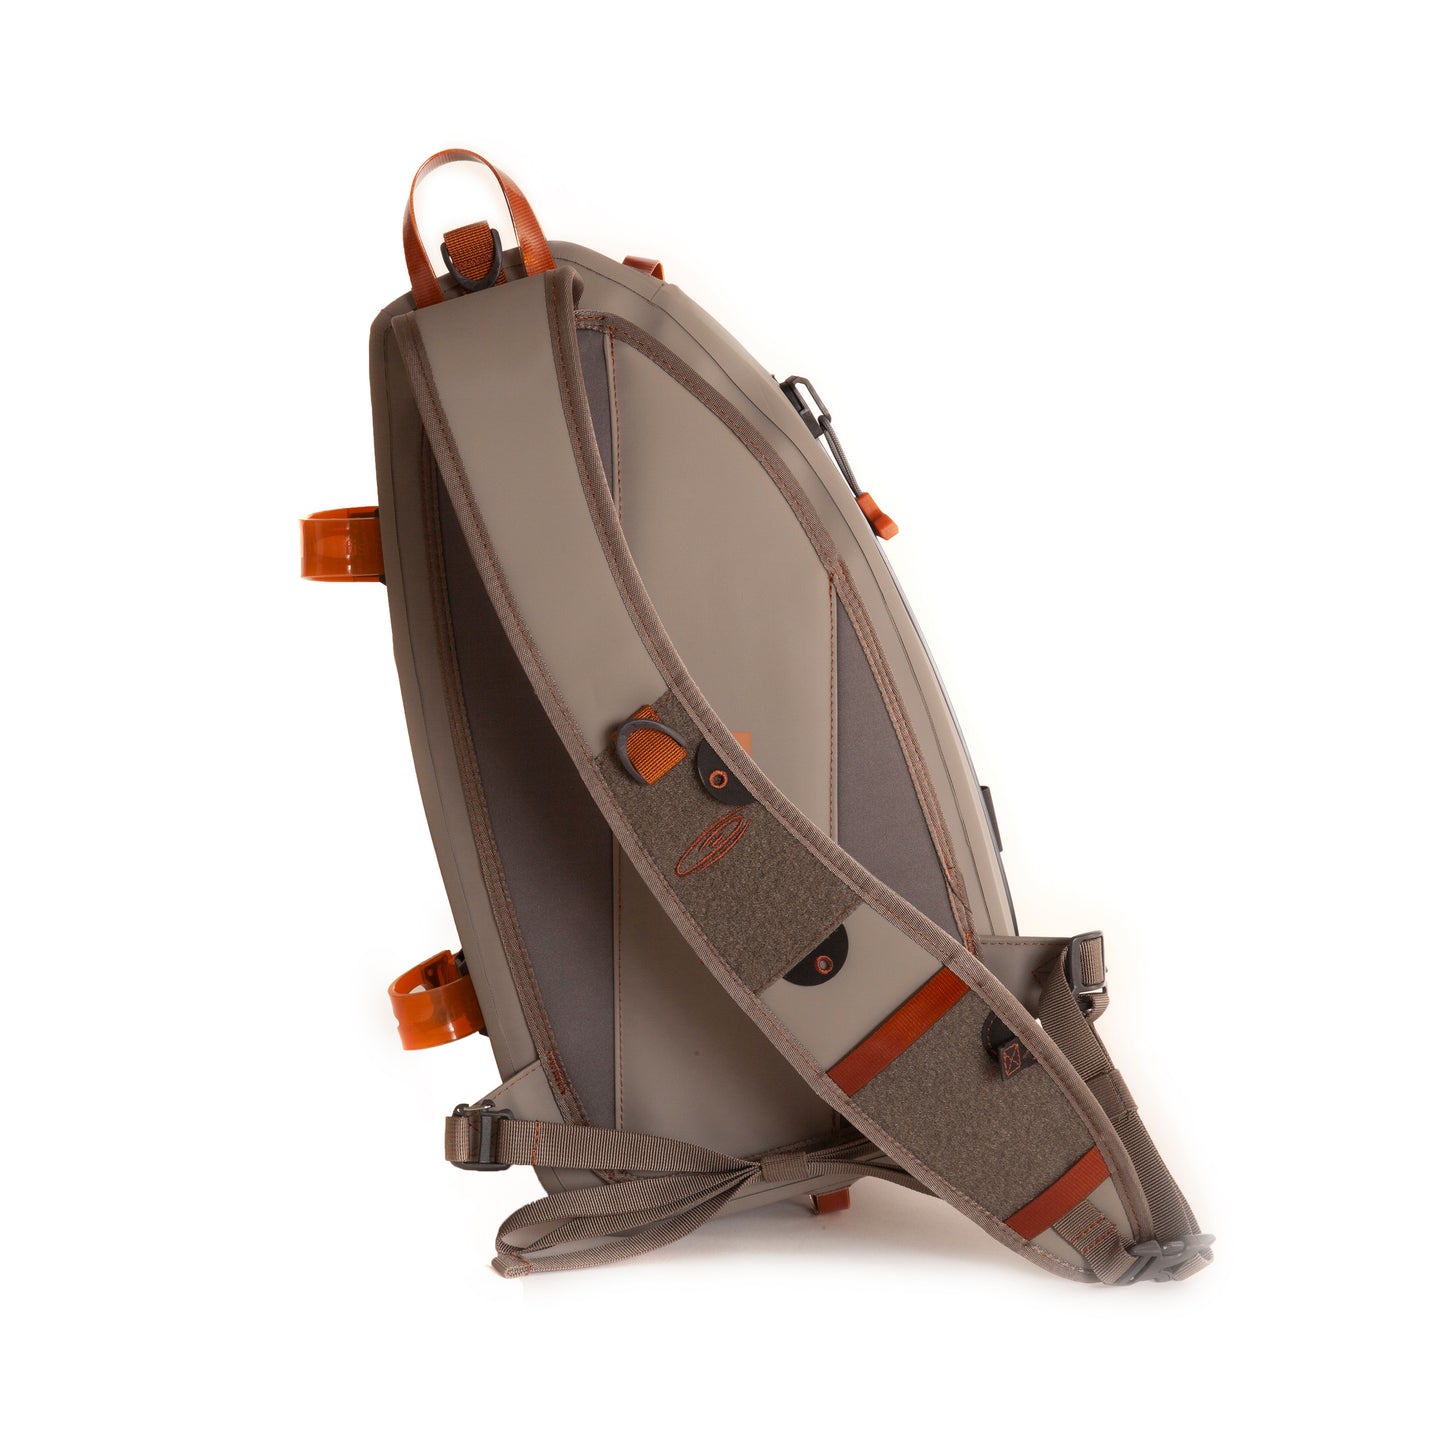 WATERPROOF TACKLE BAG For Wading  Fish Pond Thunderhead PACKED! 